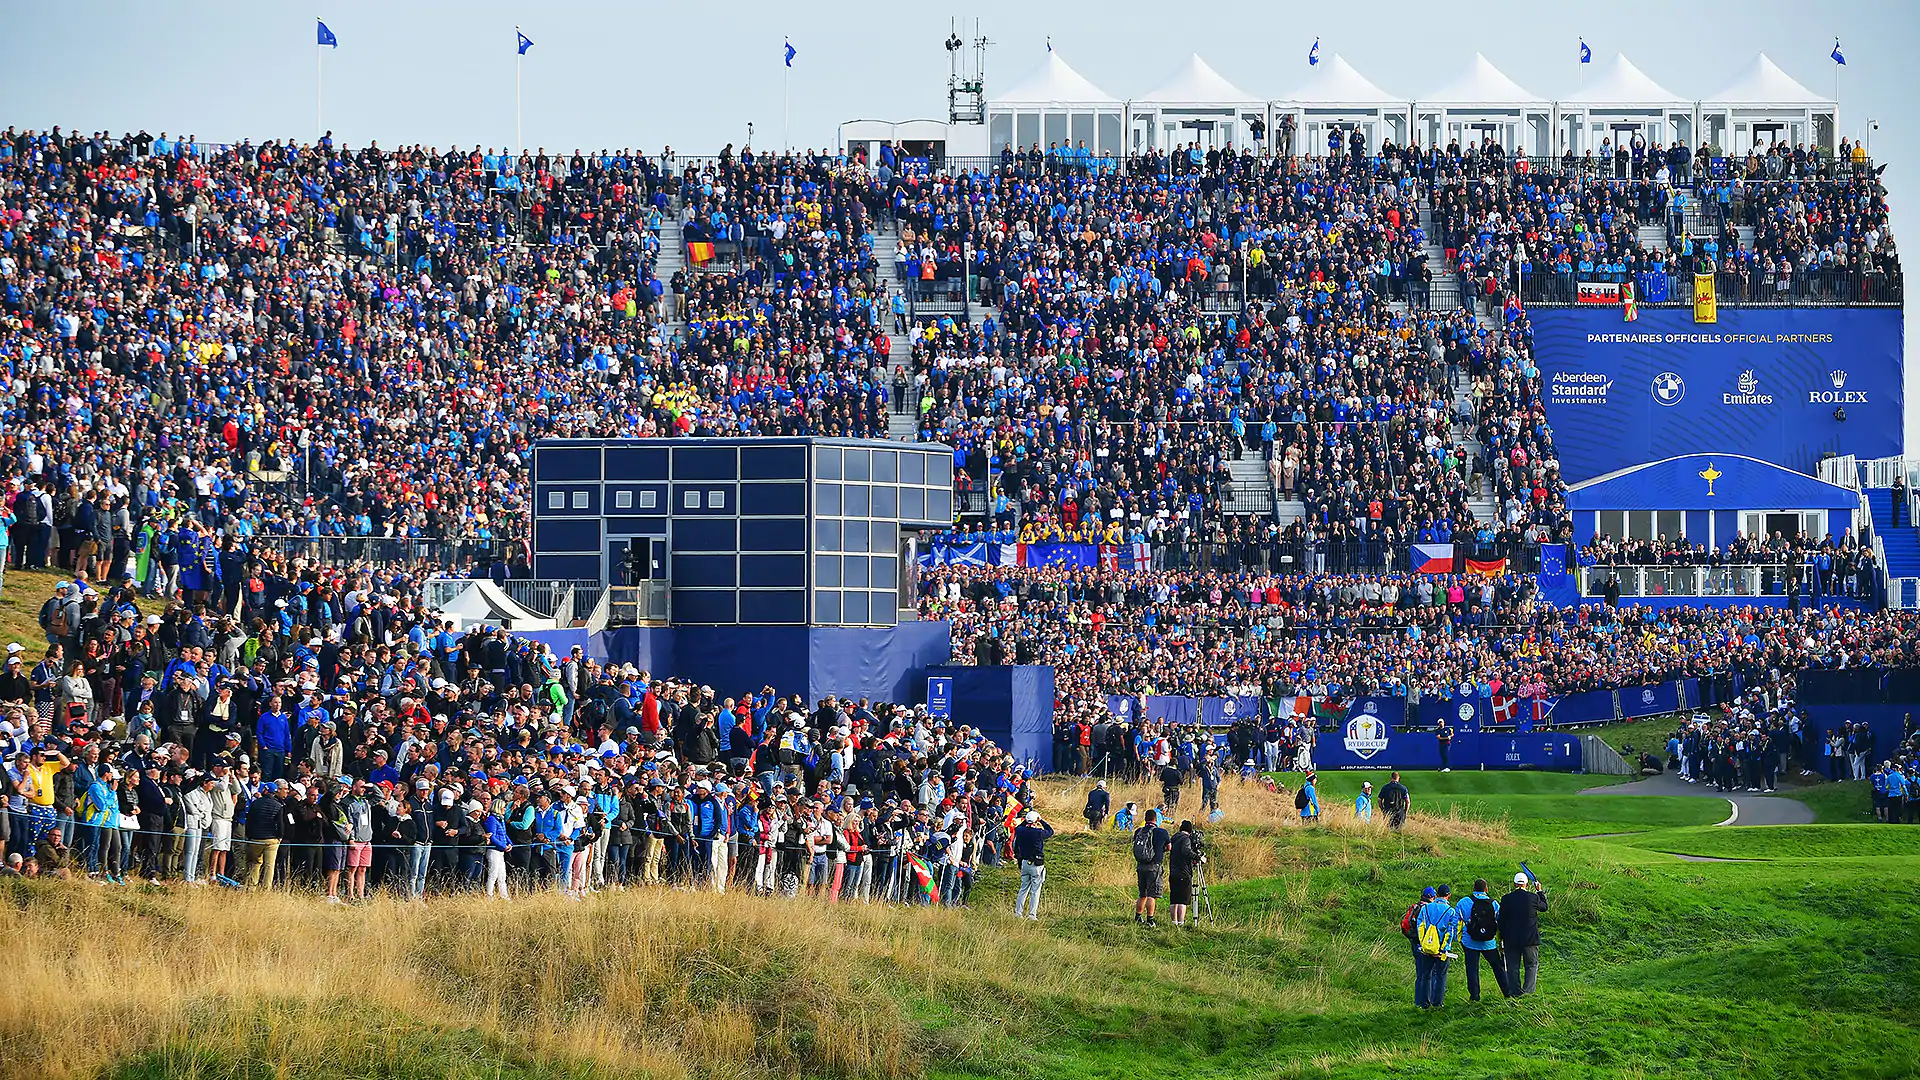 Scene at the first tee: Where was the noise?